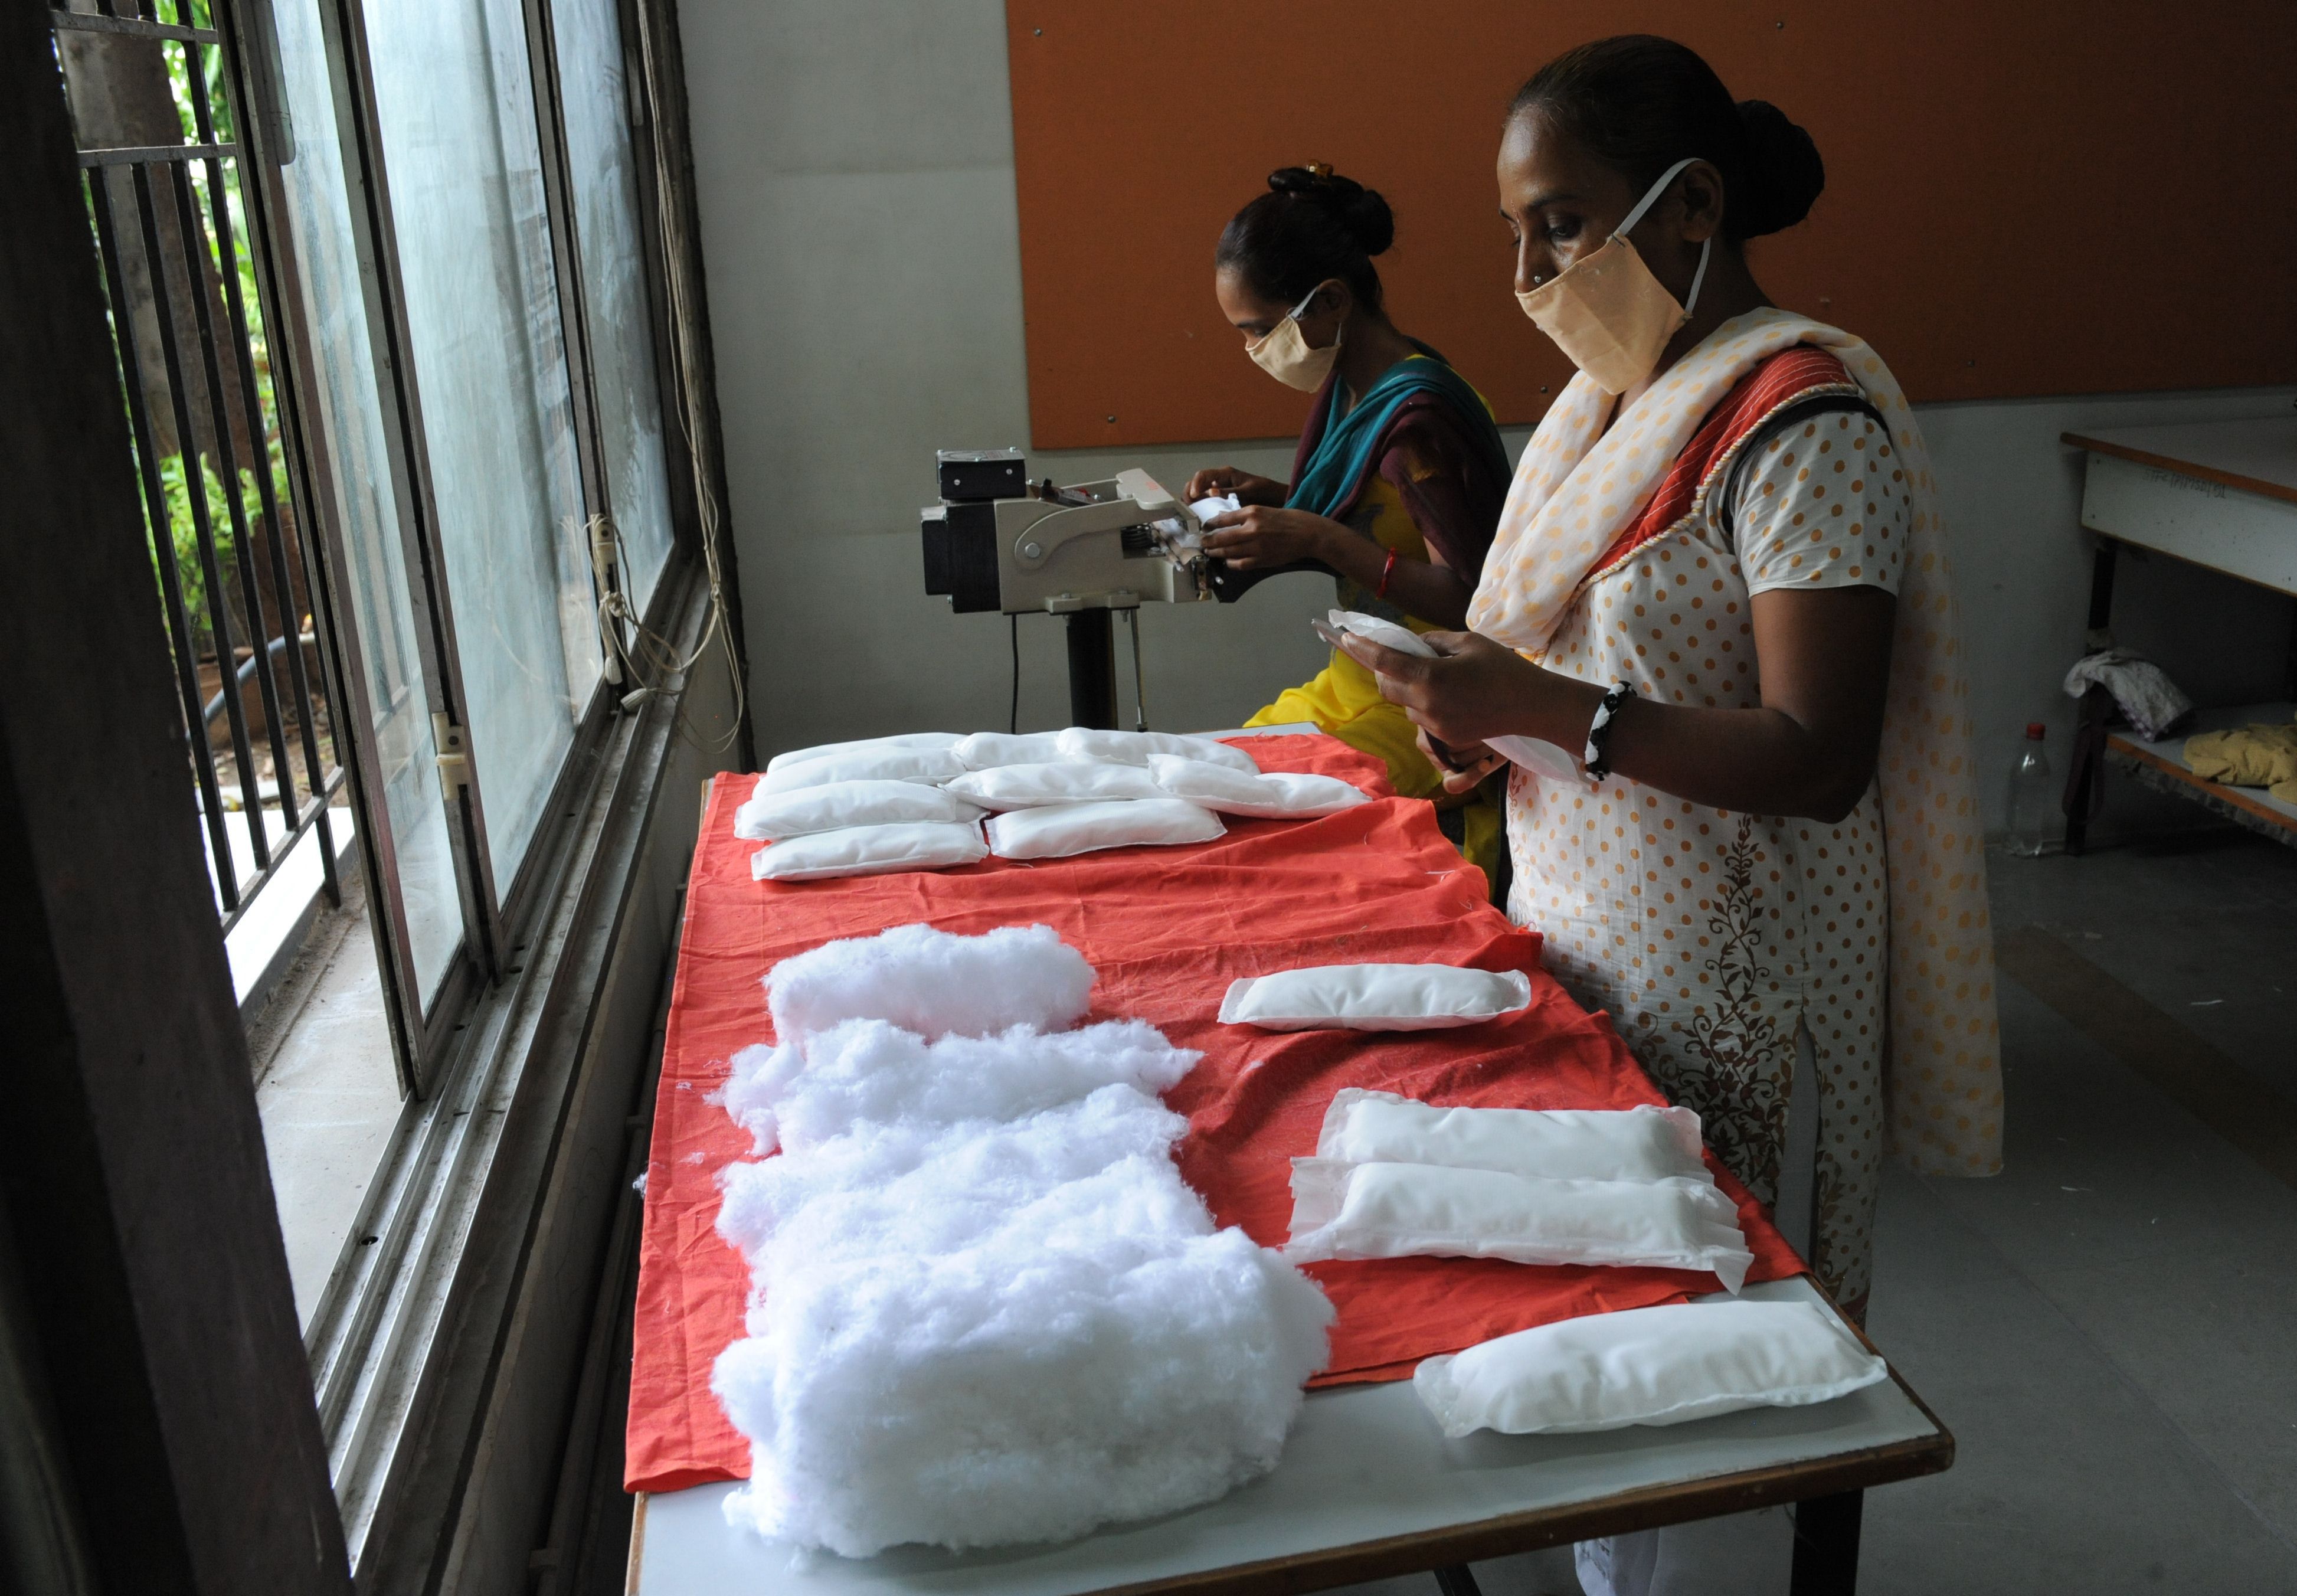 As India breaks the taboo over sanitary pads, an environmental crisis mounts